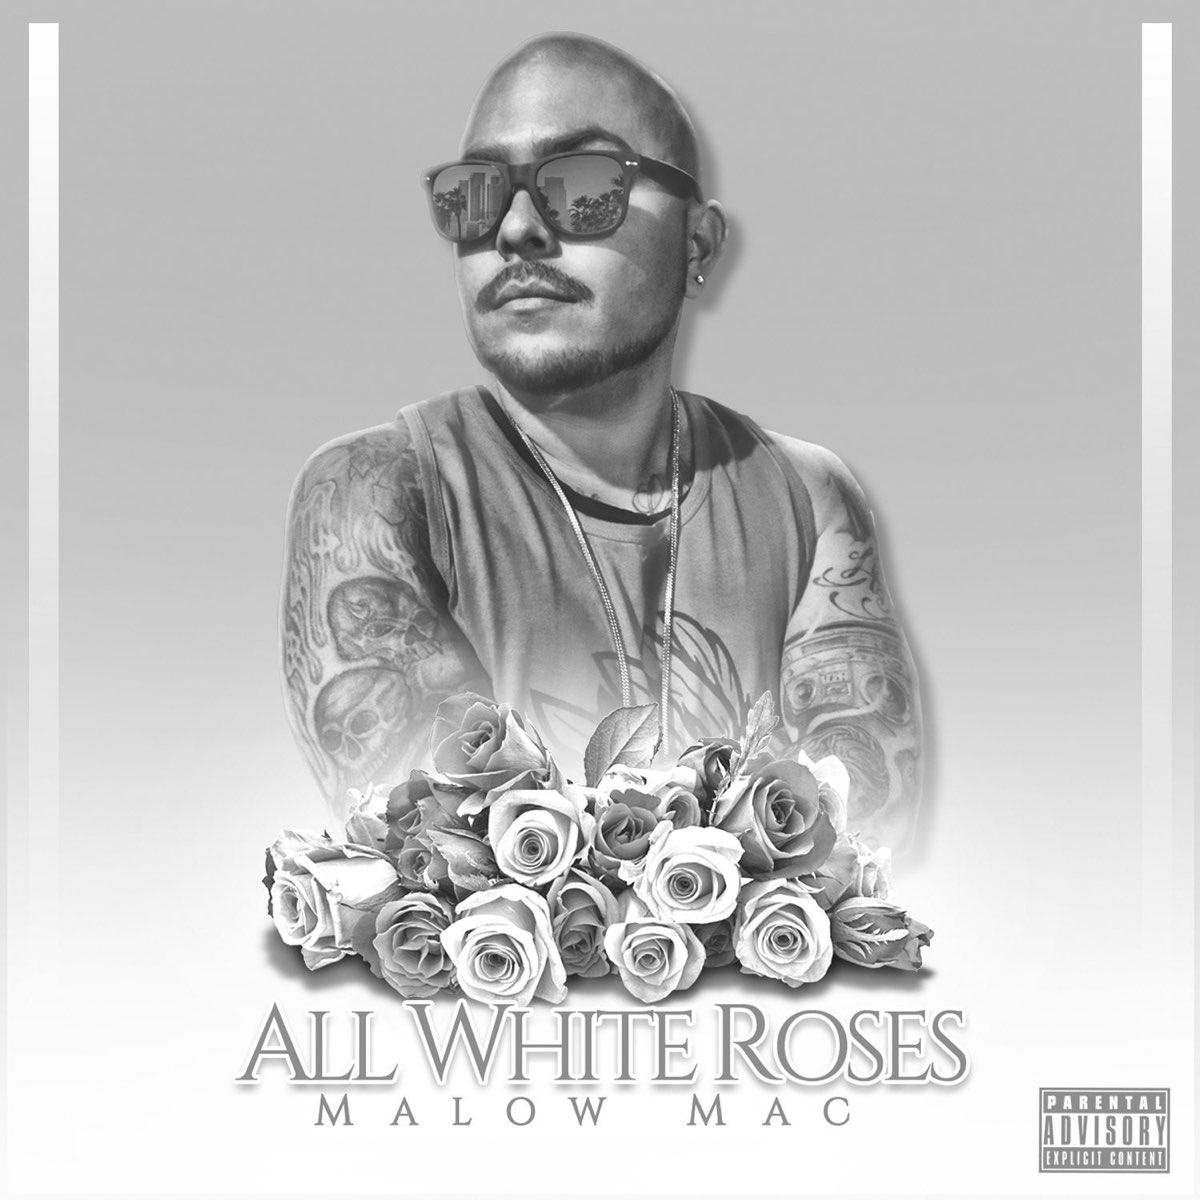 Malow Mac - All White Roses